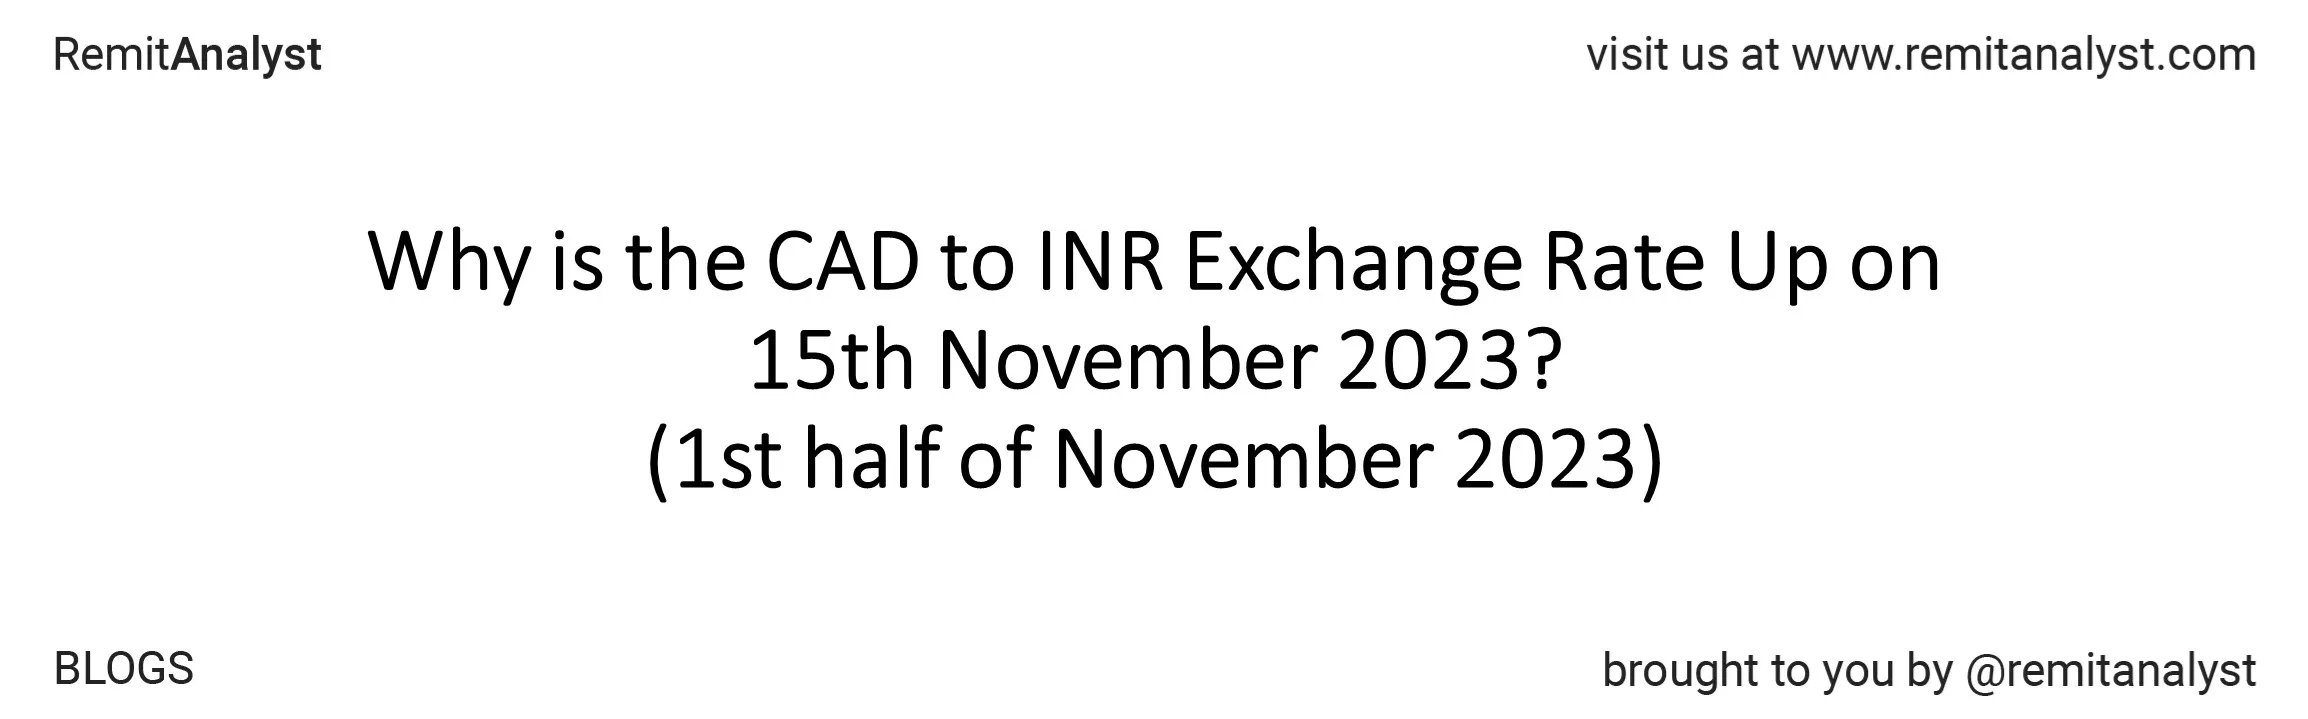 cad-to-inr-exchange-rate-from-1-nov-2023-to-15-nov-2023-title